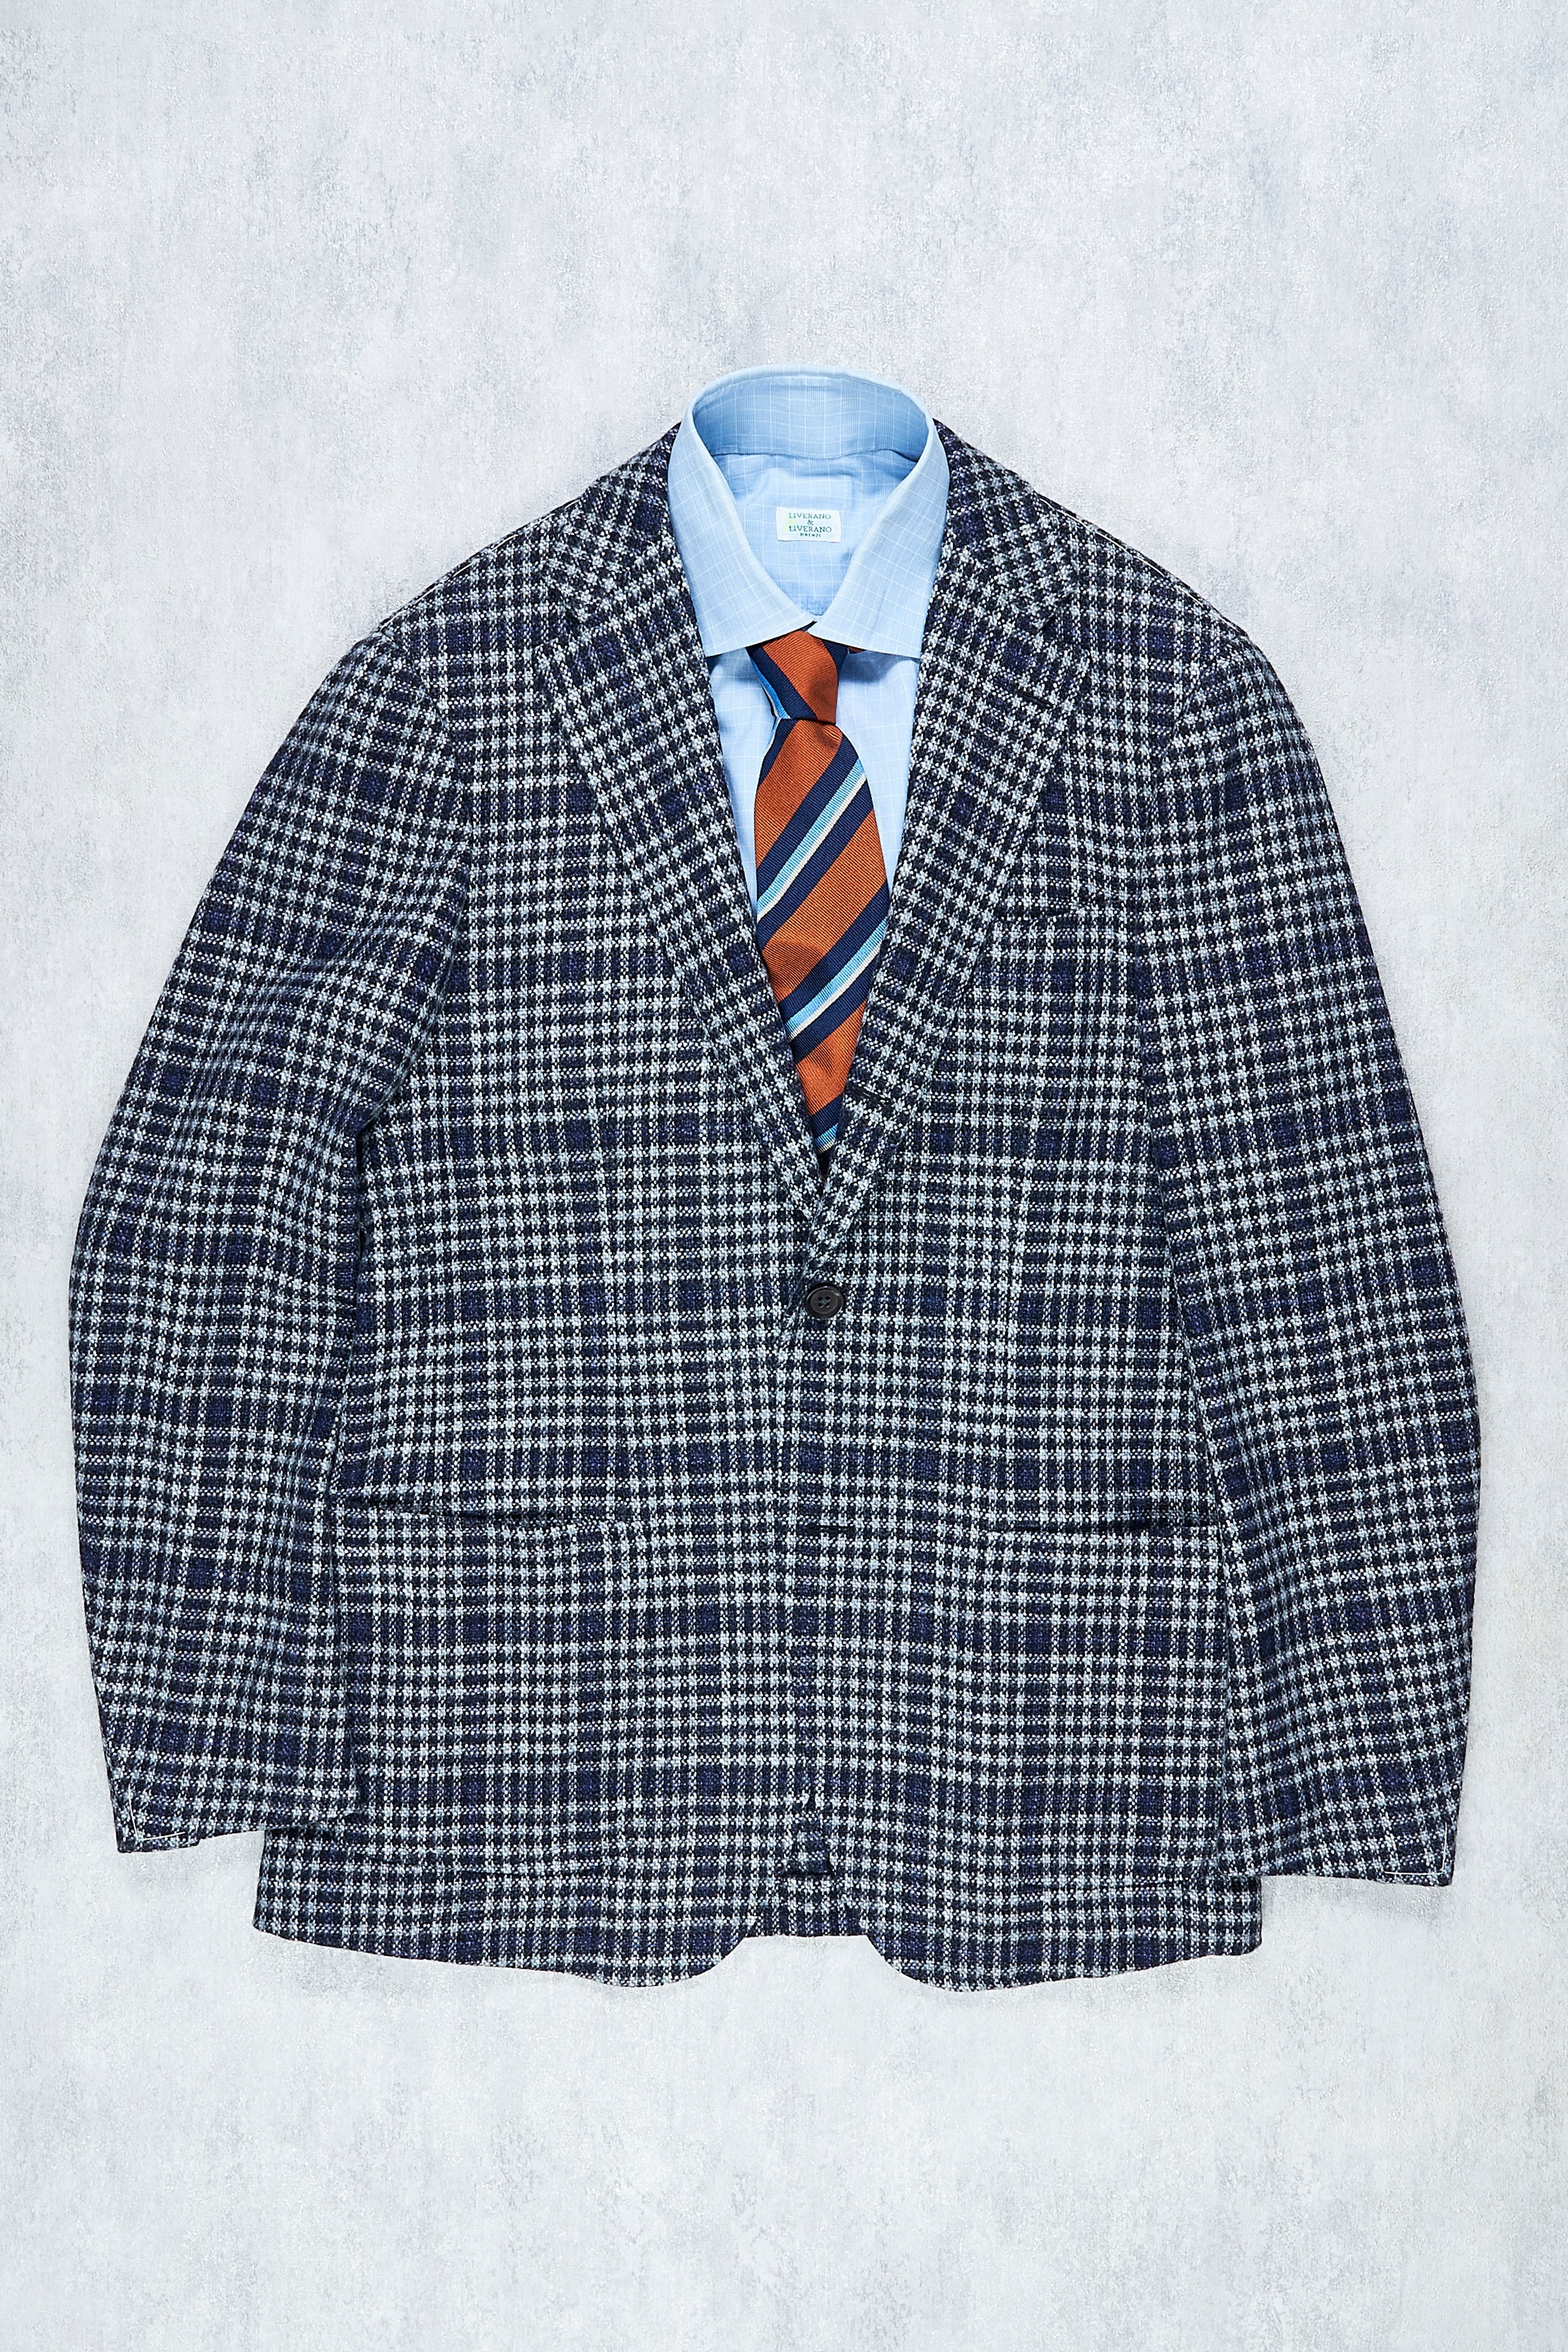 Ring Jacket 278 Navy White Prince of Wales Check Wool Silk Sport Coat